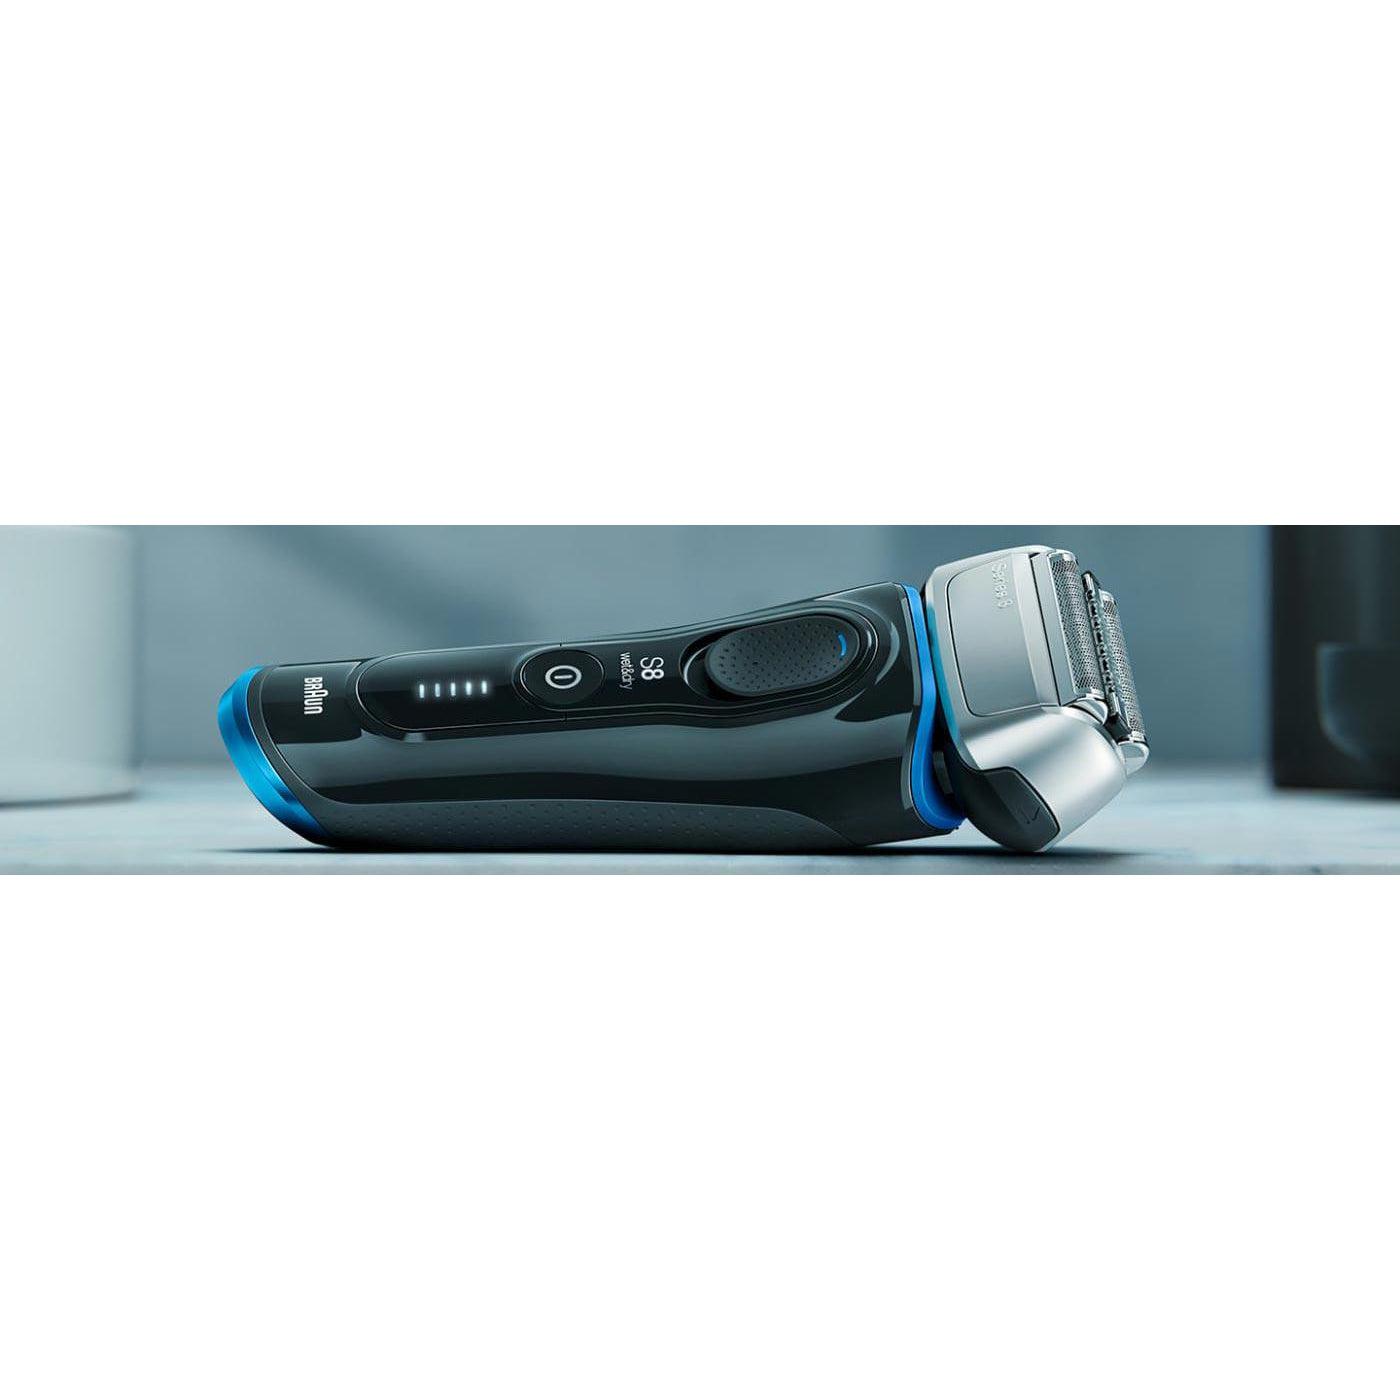 Best Buy: Braun Series 3 Shave&Style Wet/Dry Electric Shaver Blue